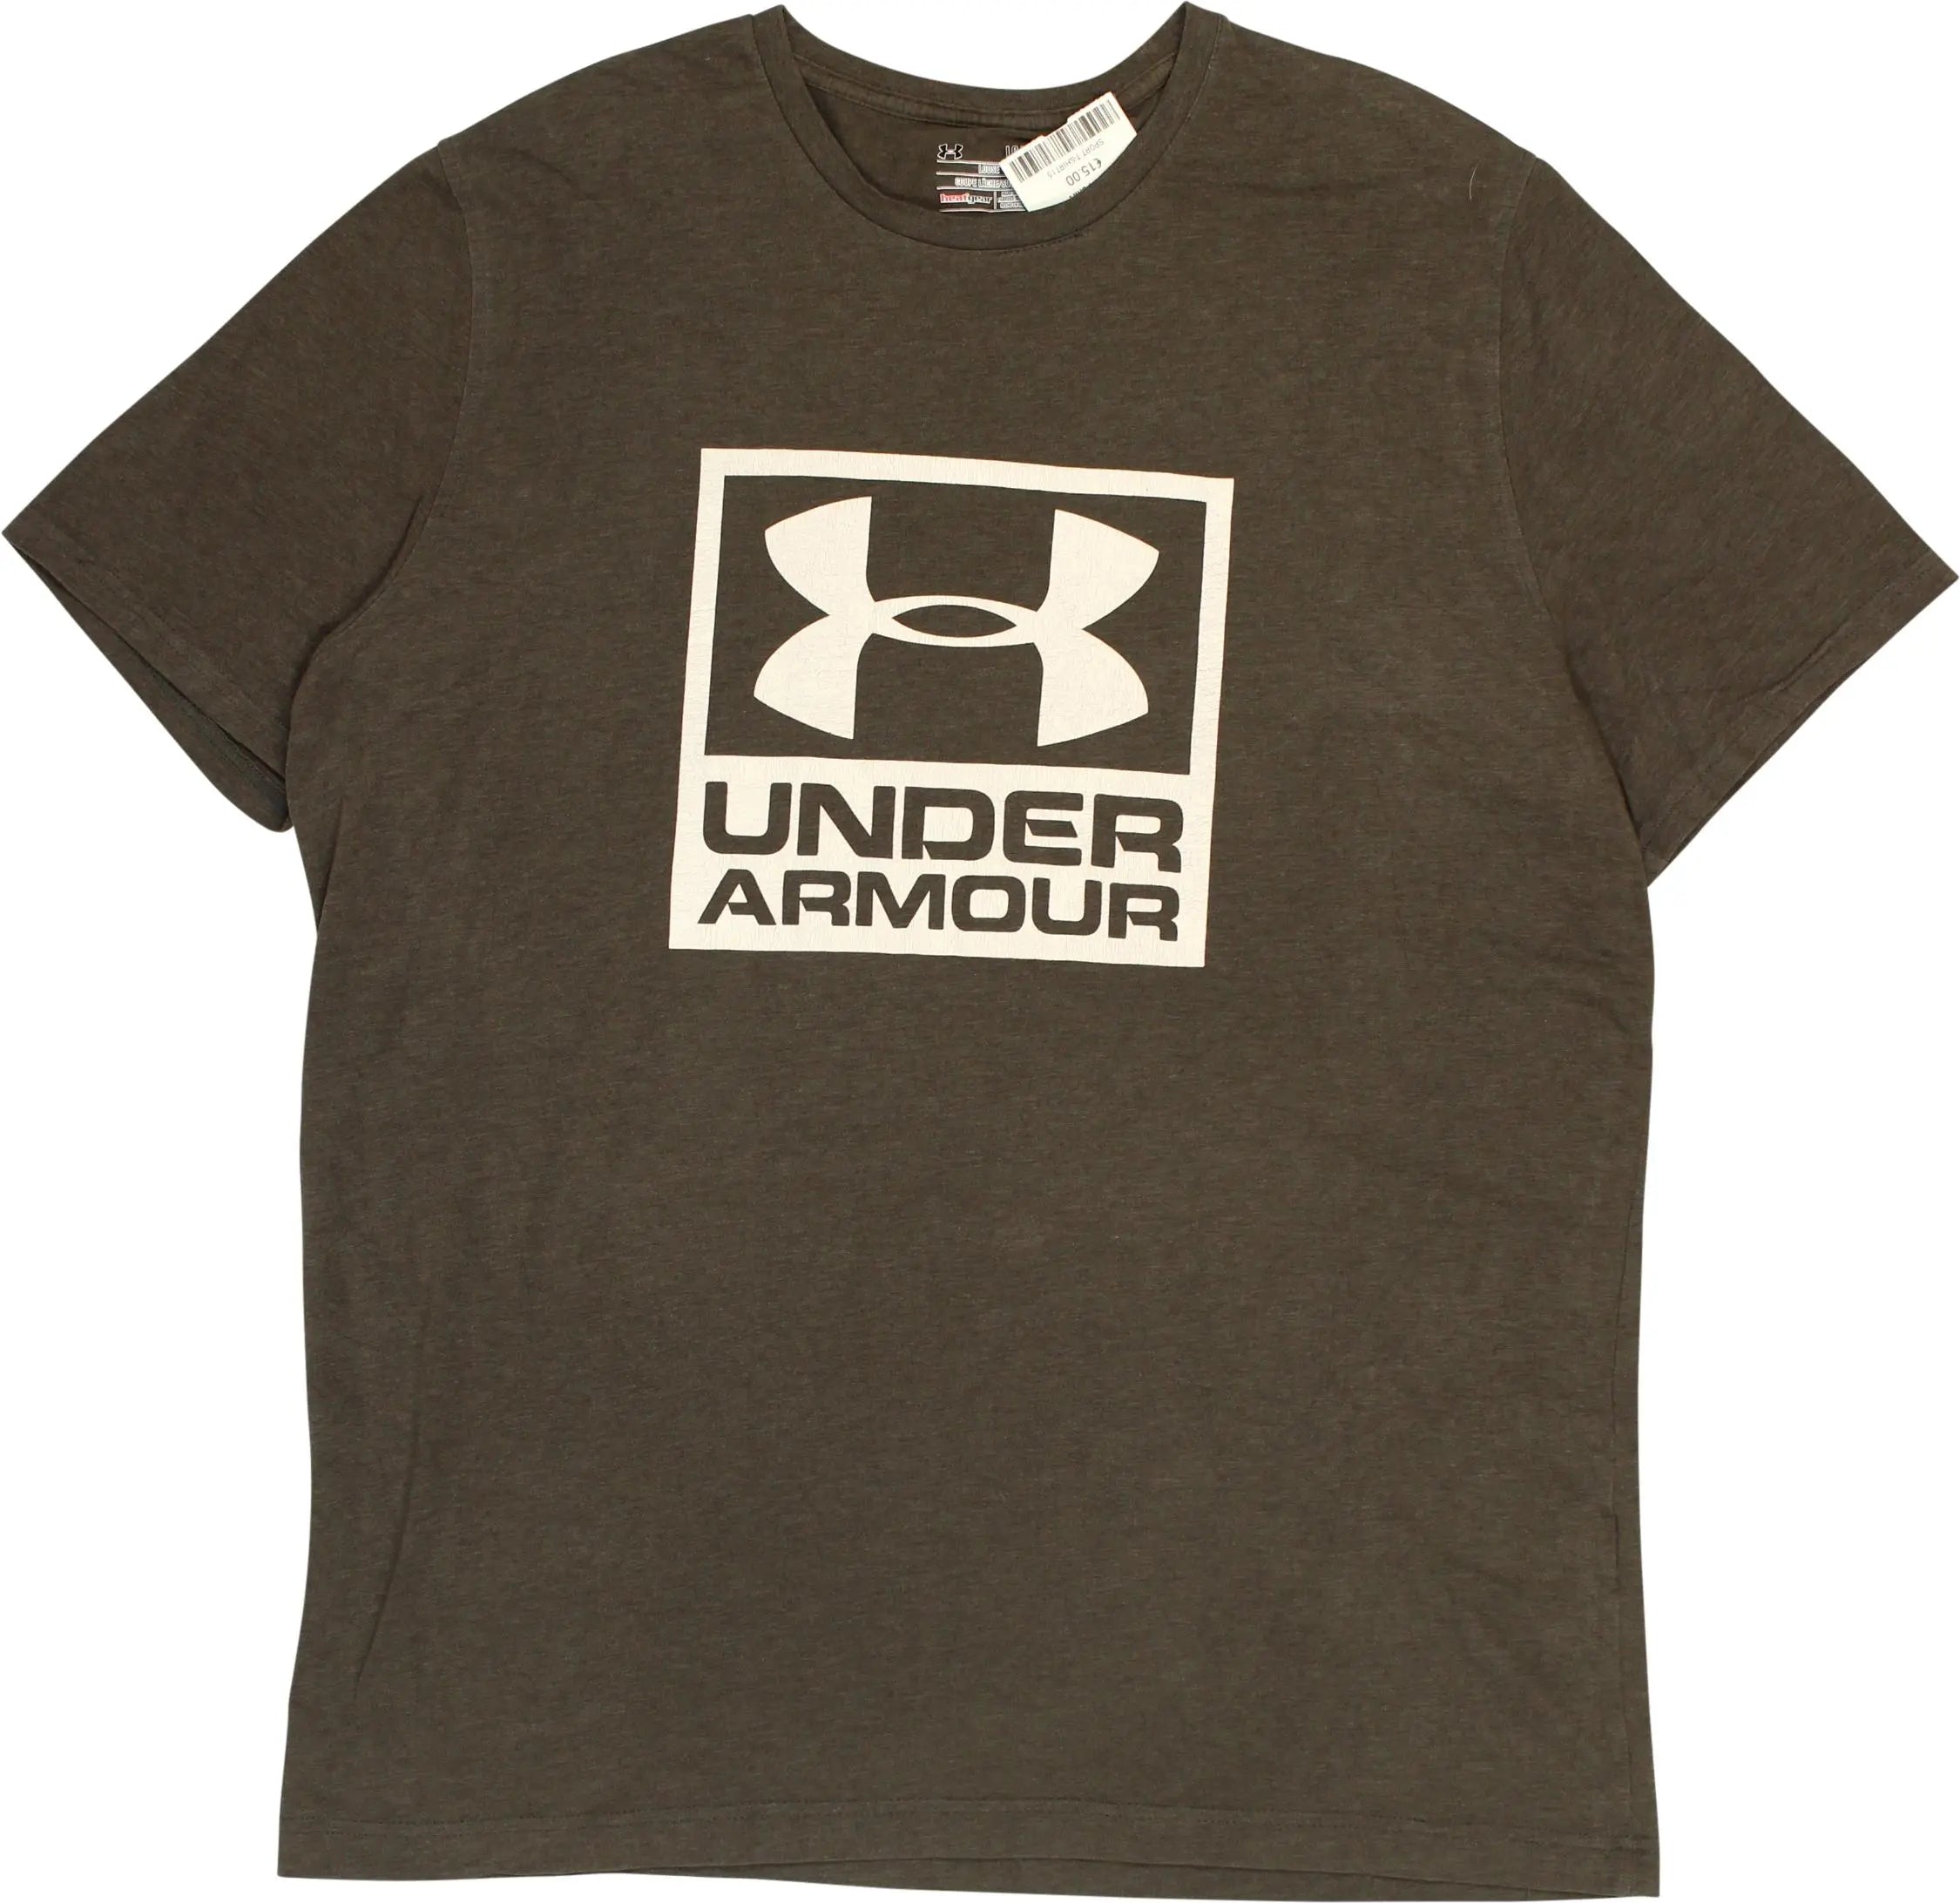 Under Armour - Under Armour T-shirt- ThriftTale.com - Vintage and second handclothing